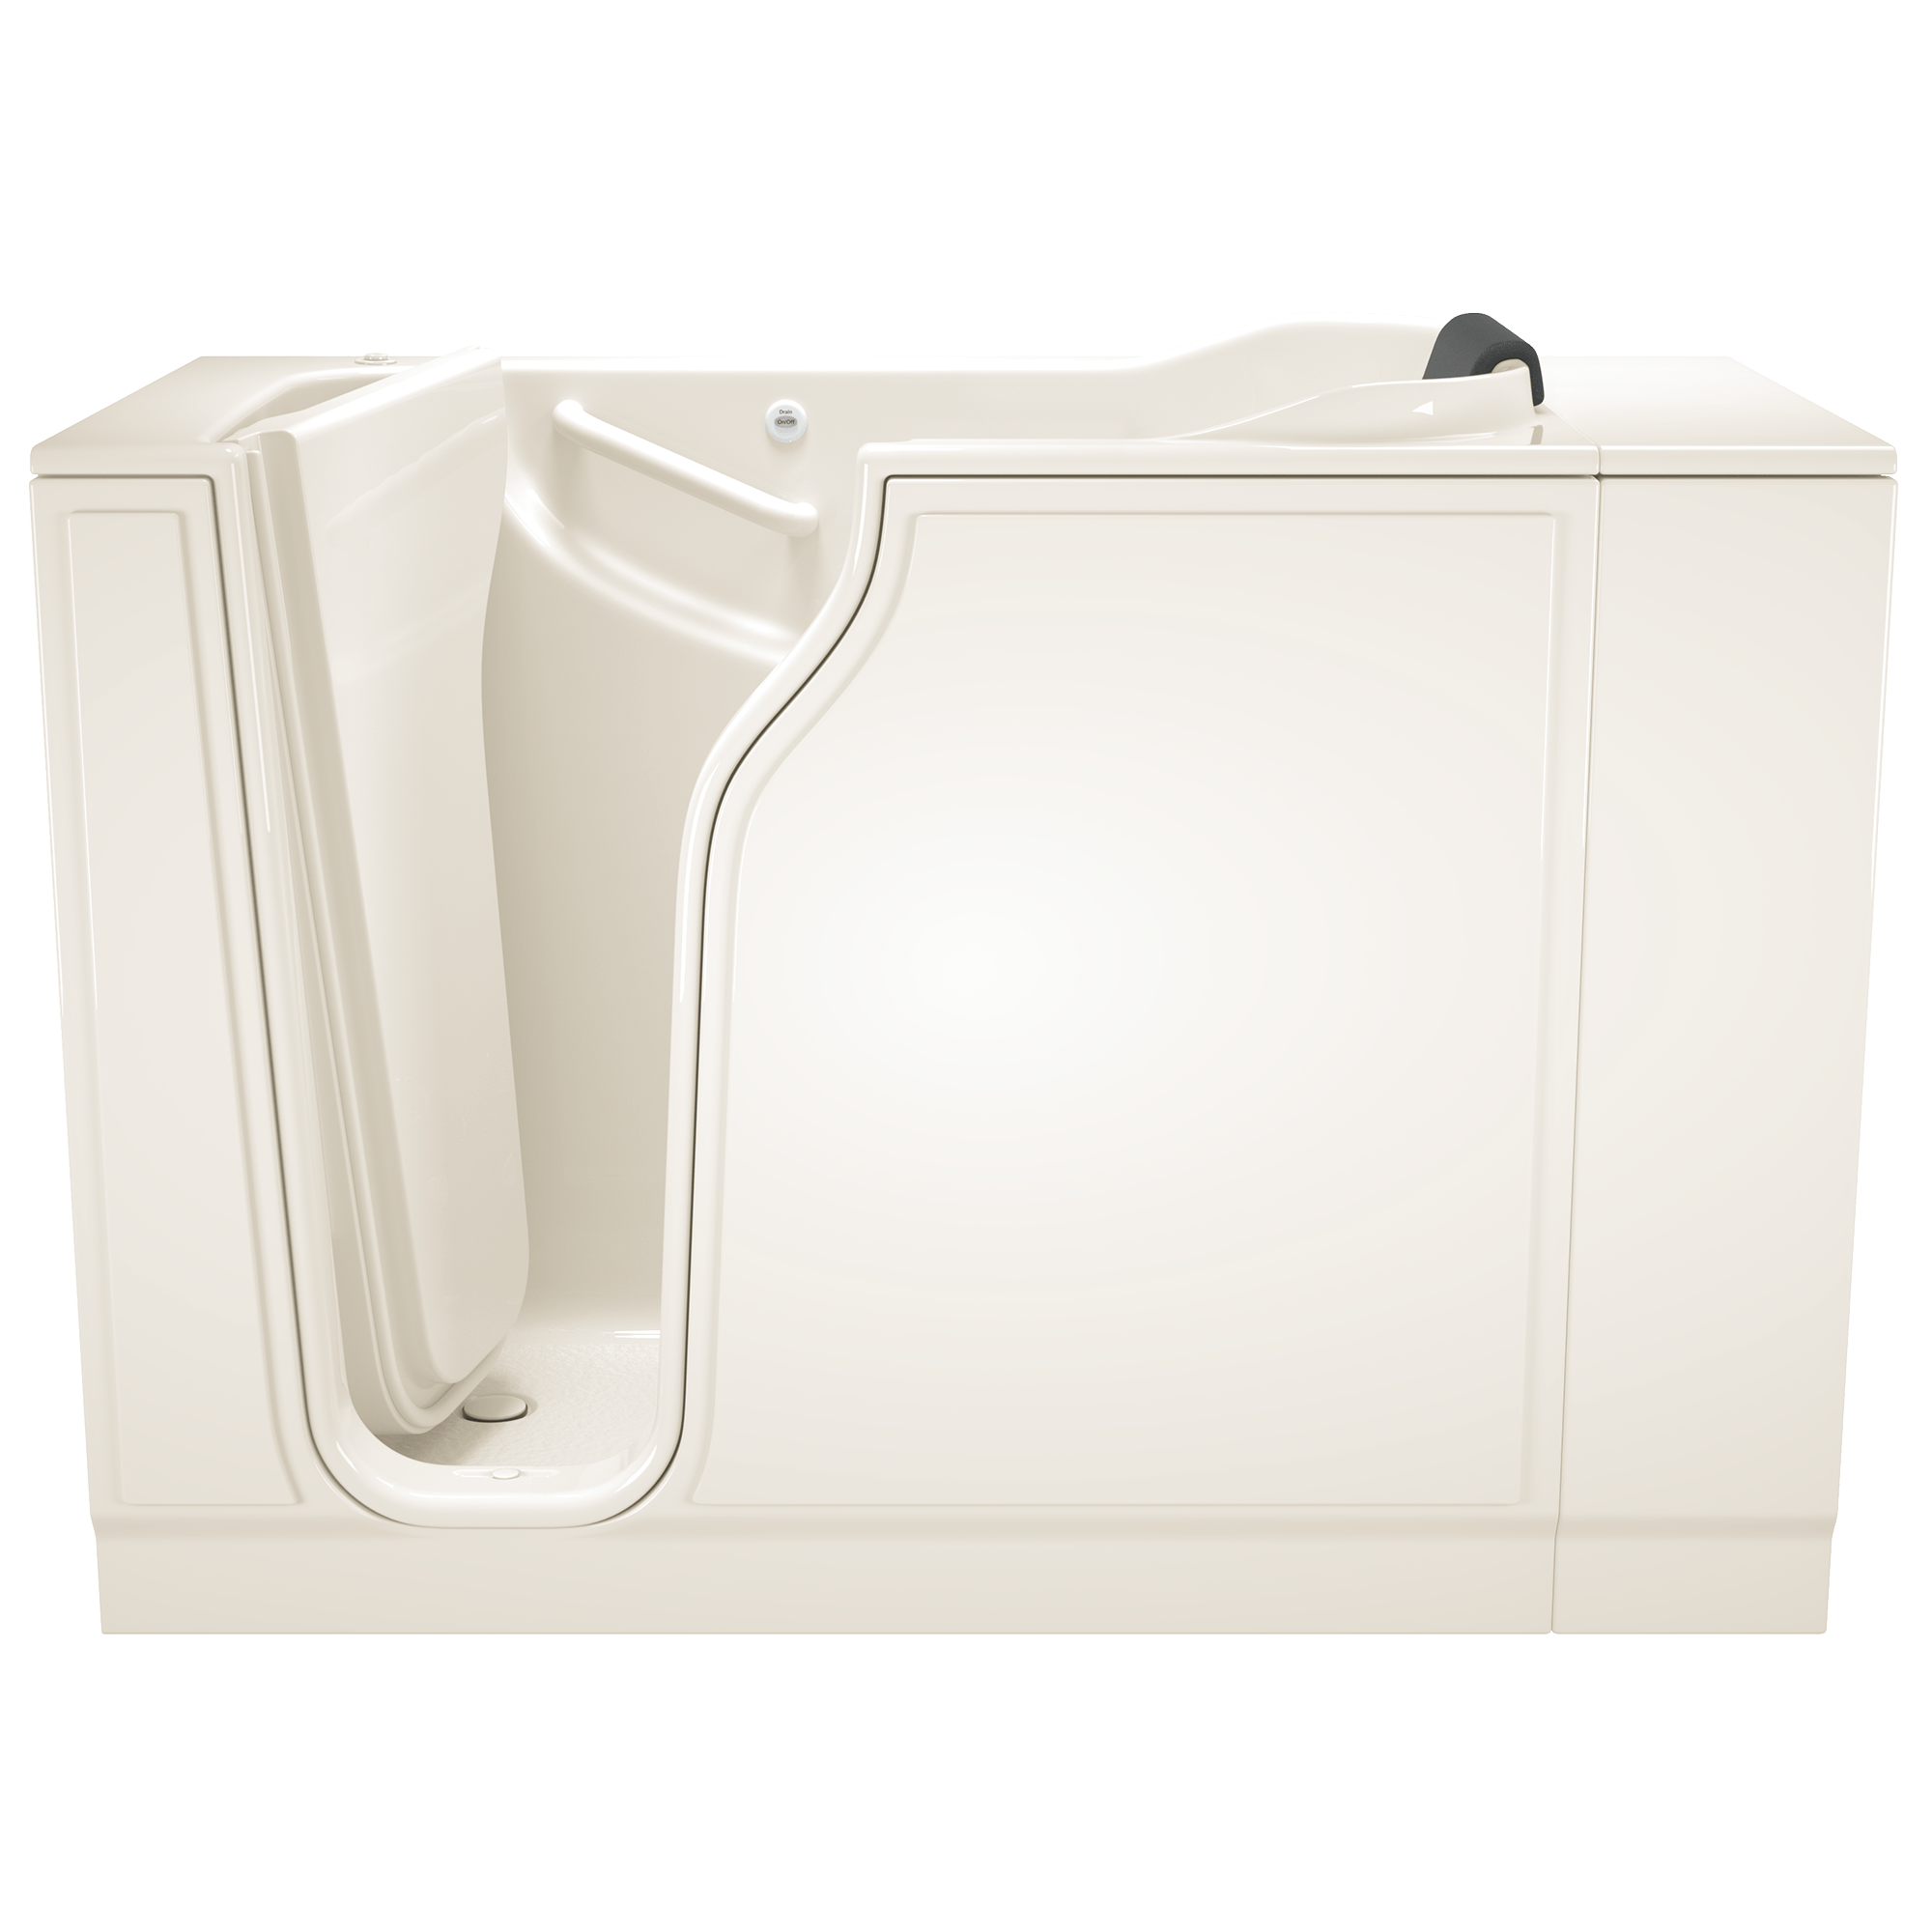 Gelcoat Premium Series 30 x 52 -Inch Walk-in Tub With Whirlpool System - Left-Hand Drain